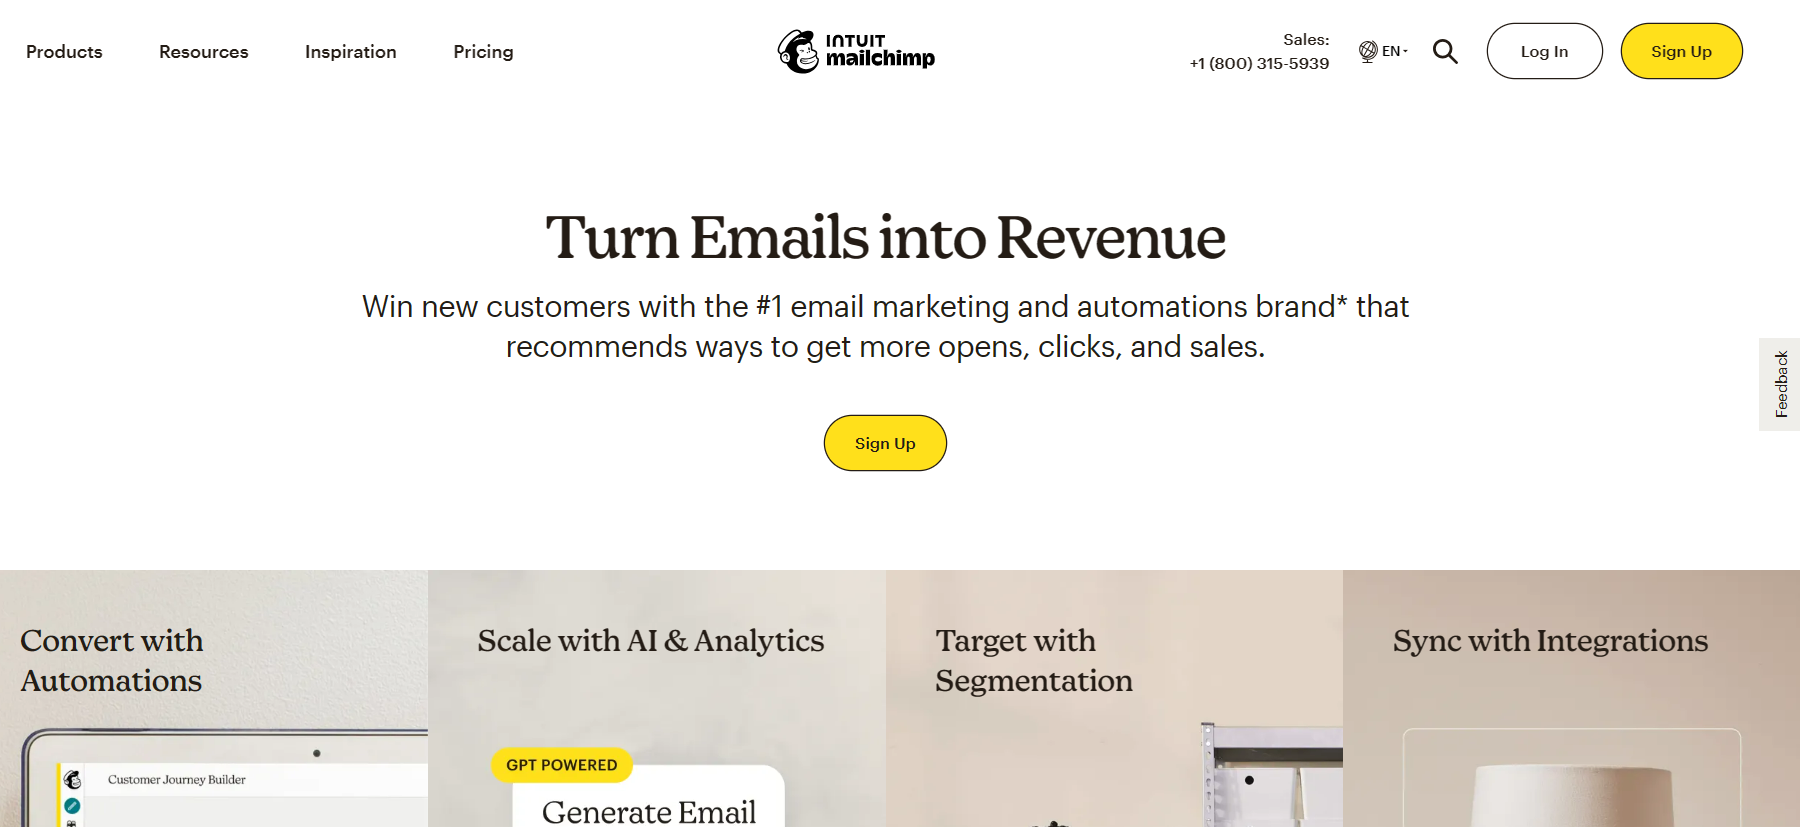 Mailchimp vs GetResponse: Comparing Features and Capabilities of Email Marketing Platforms.